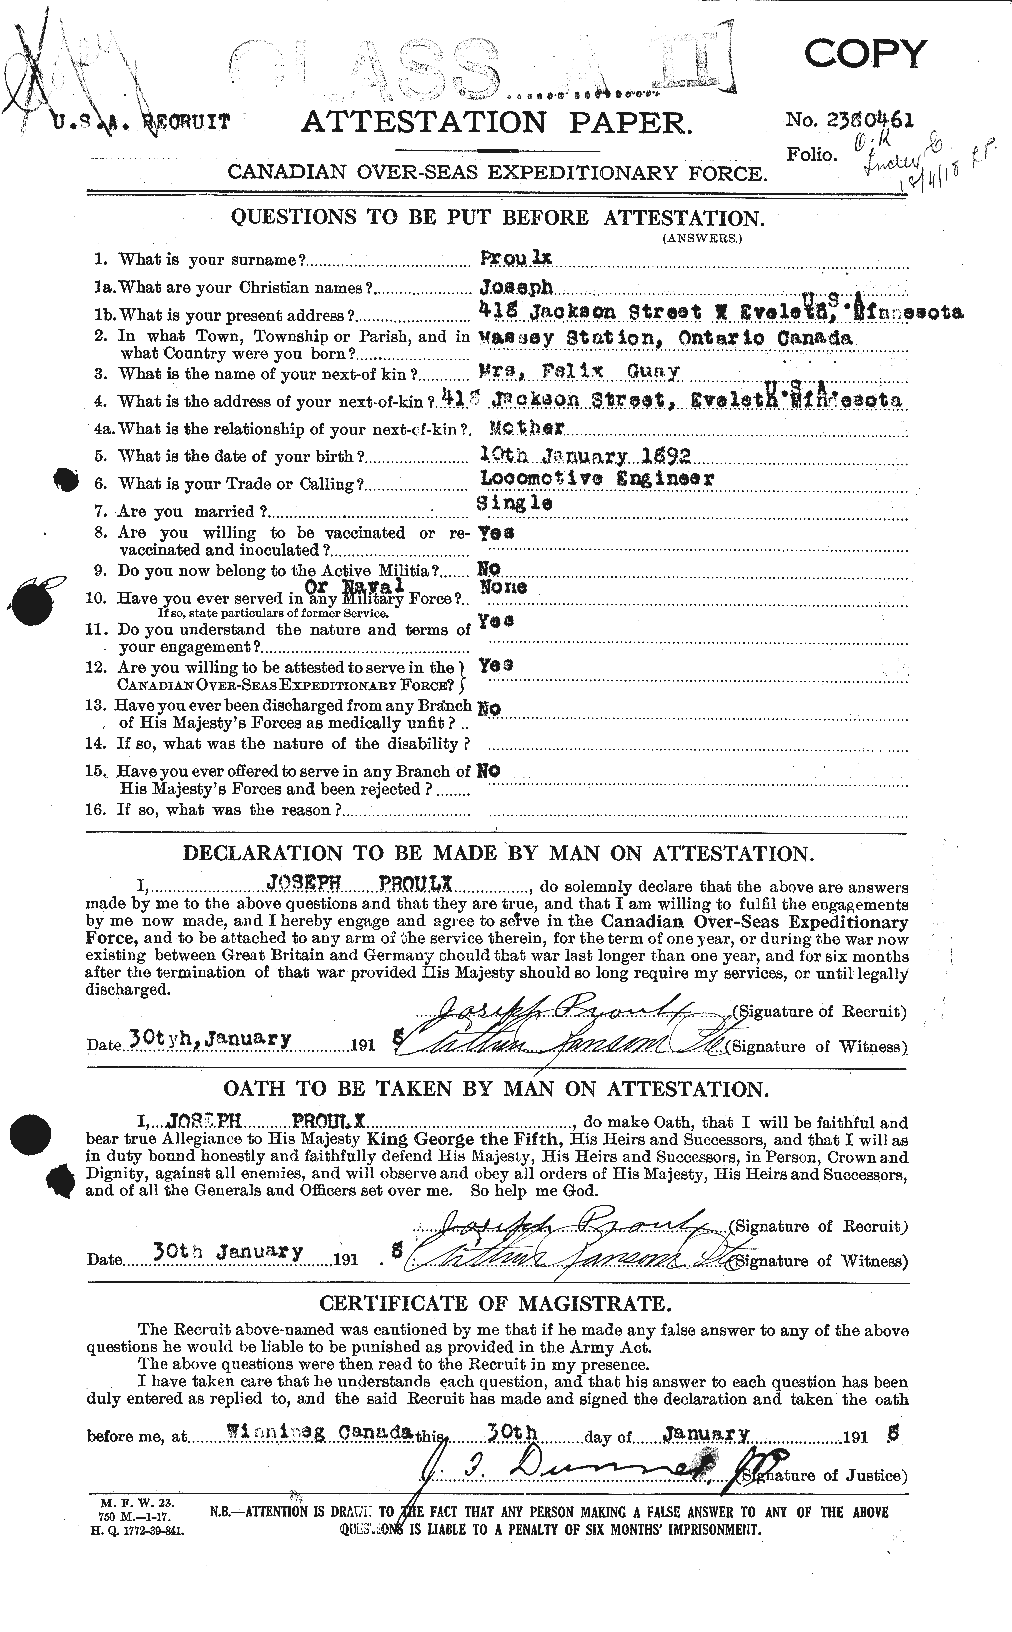 Personnel Records of the First World War - CEF 591597a